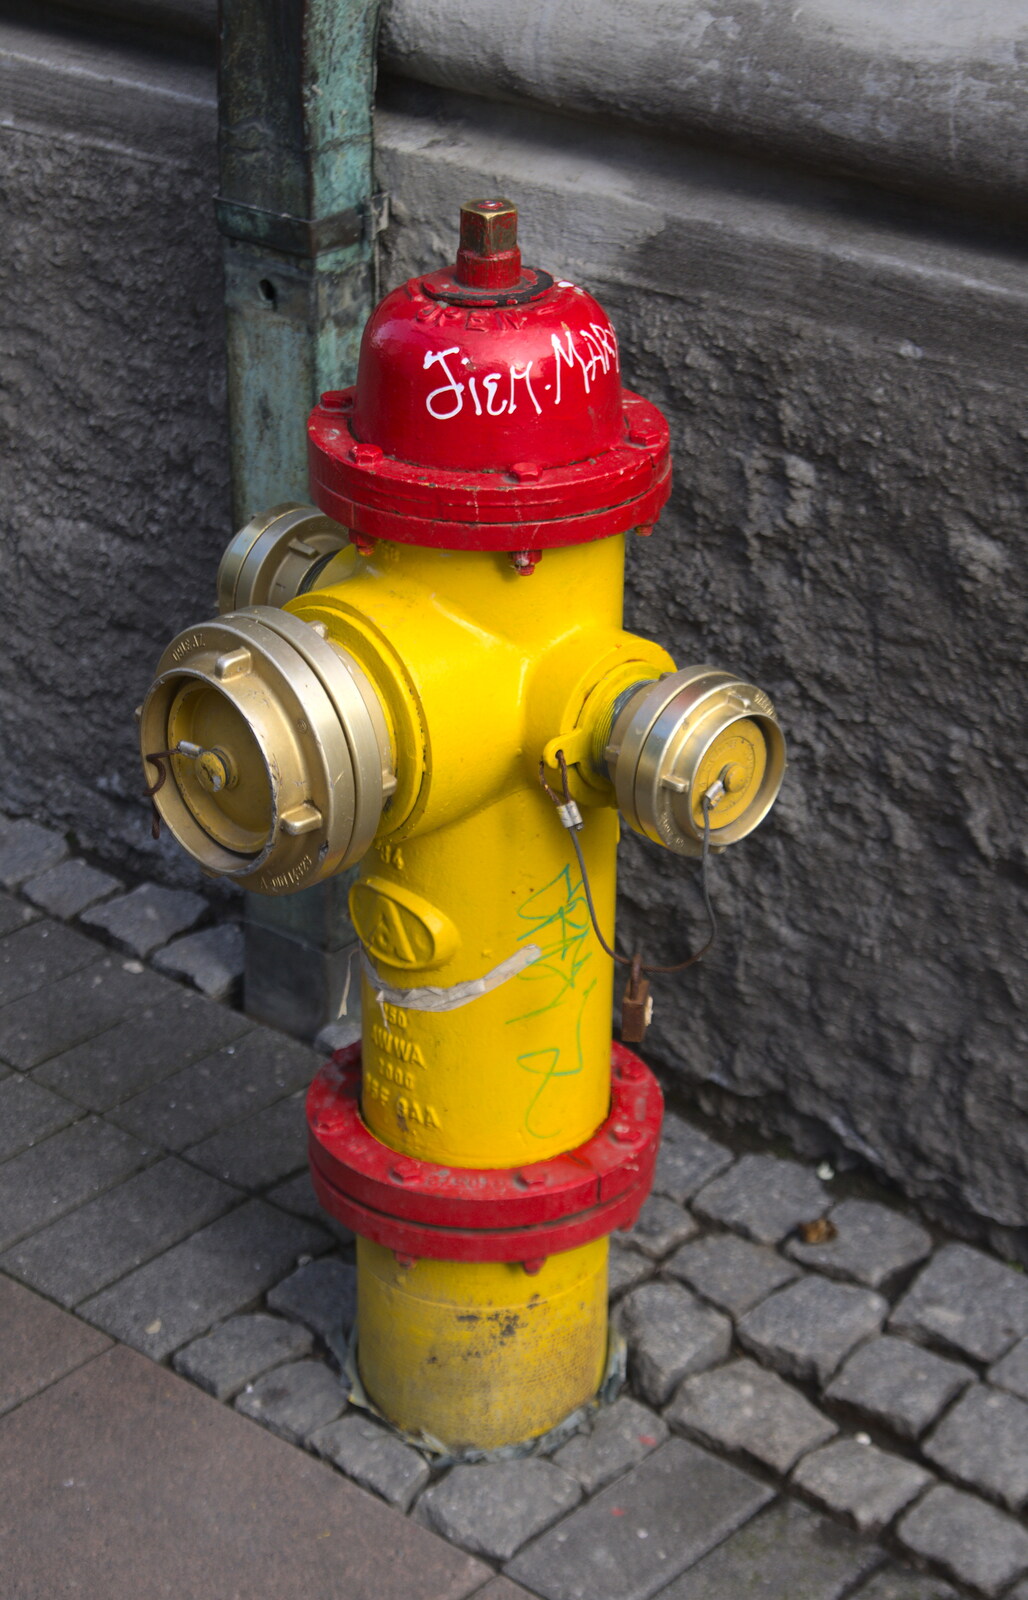 US-style fire hydrant from Hallgrímskirkja Cathedral and Whale Watching, Reykjavik - 21st April 2017